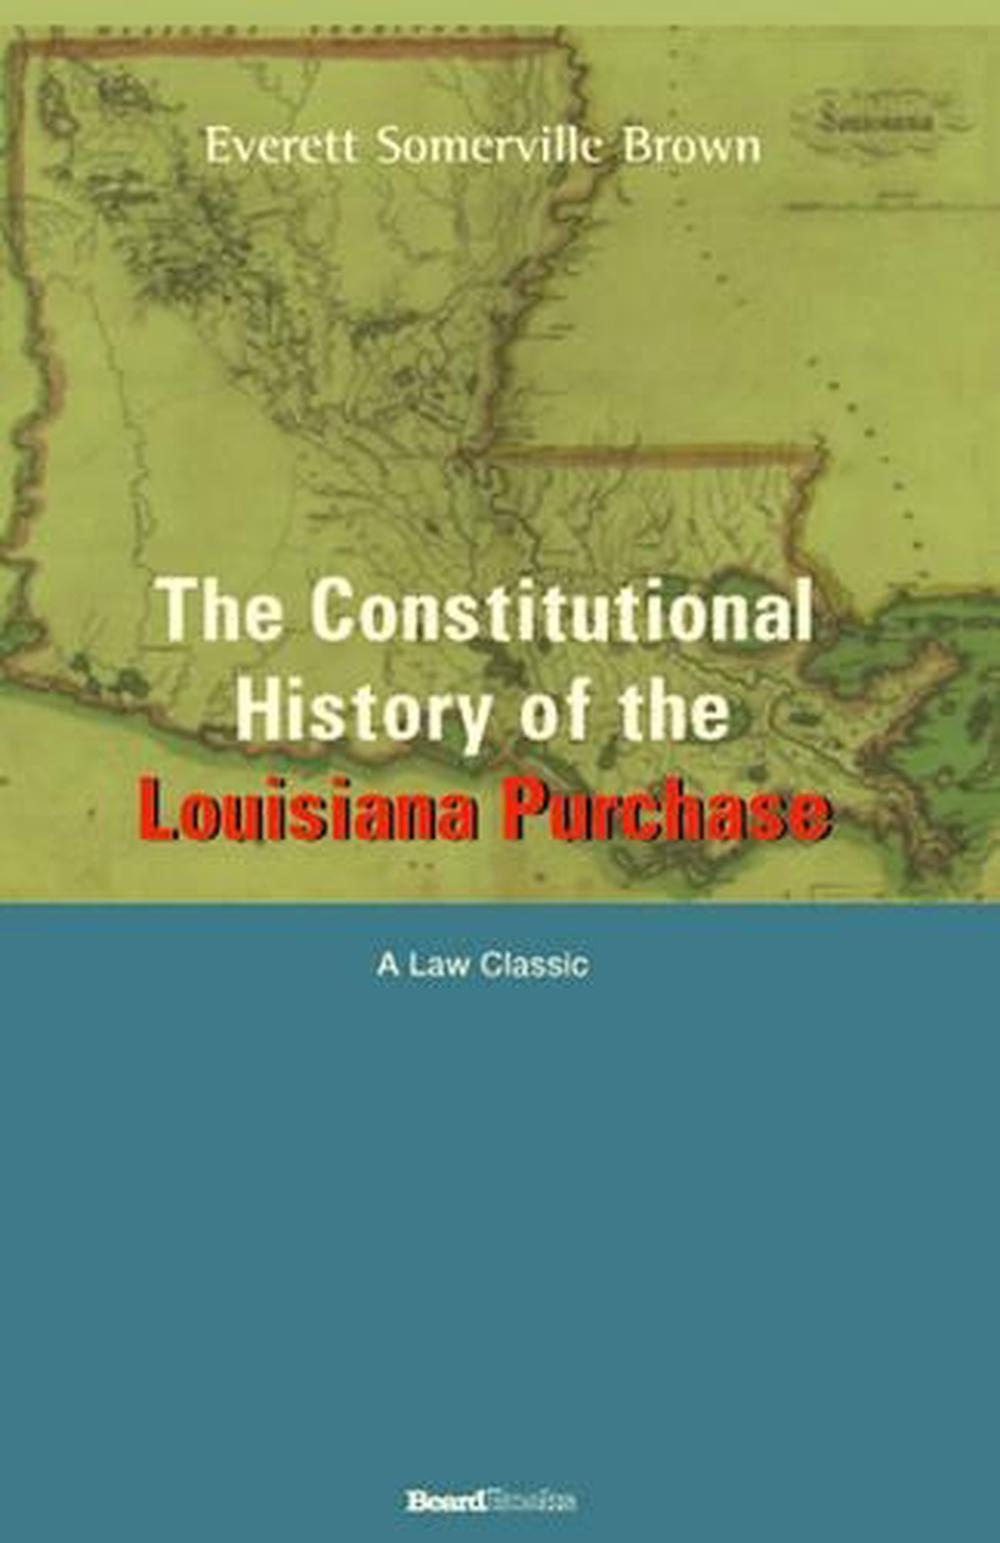 The Constitutional History of the Louisiana Purchase: 1803-1812 by Everett Somer 9781587980336 ...